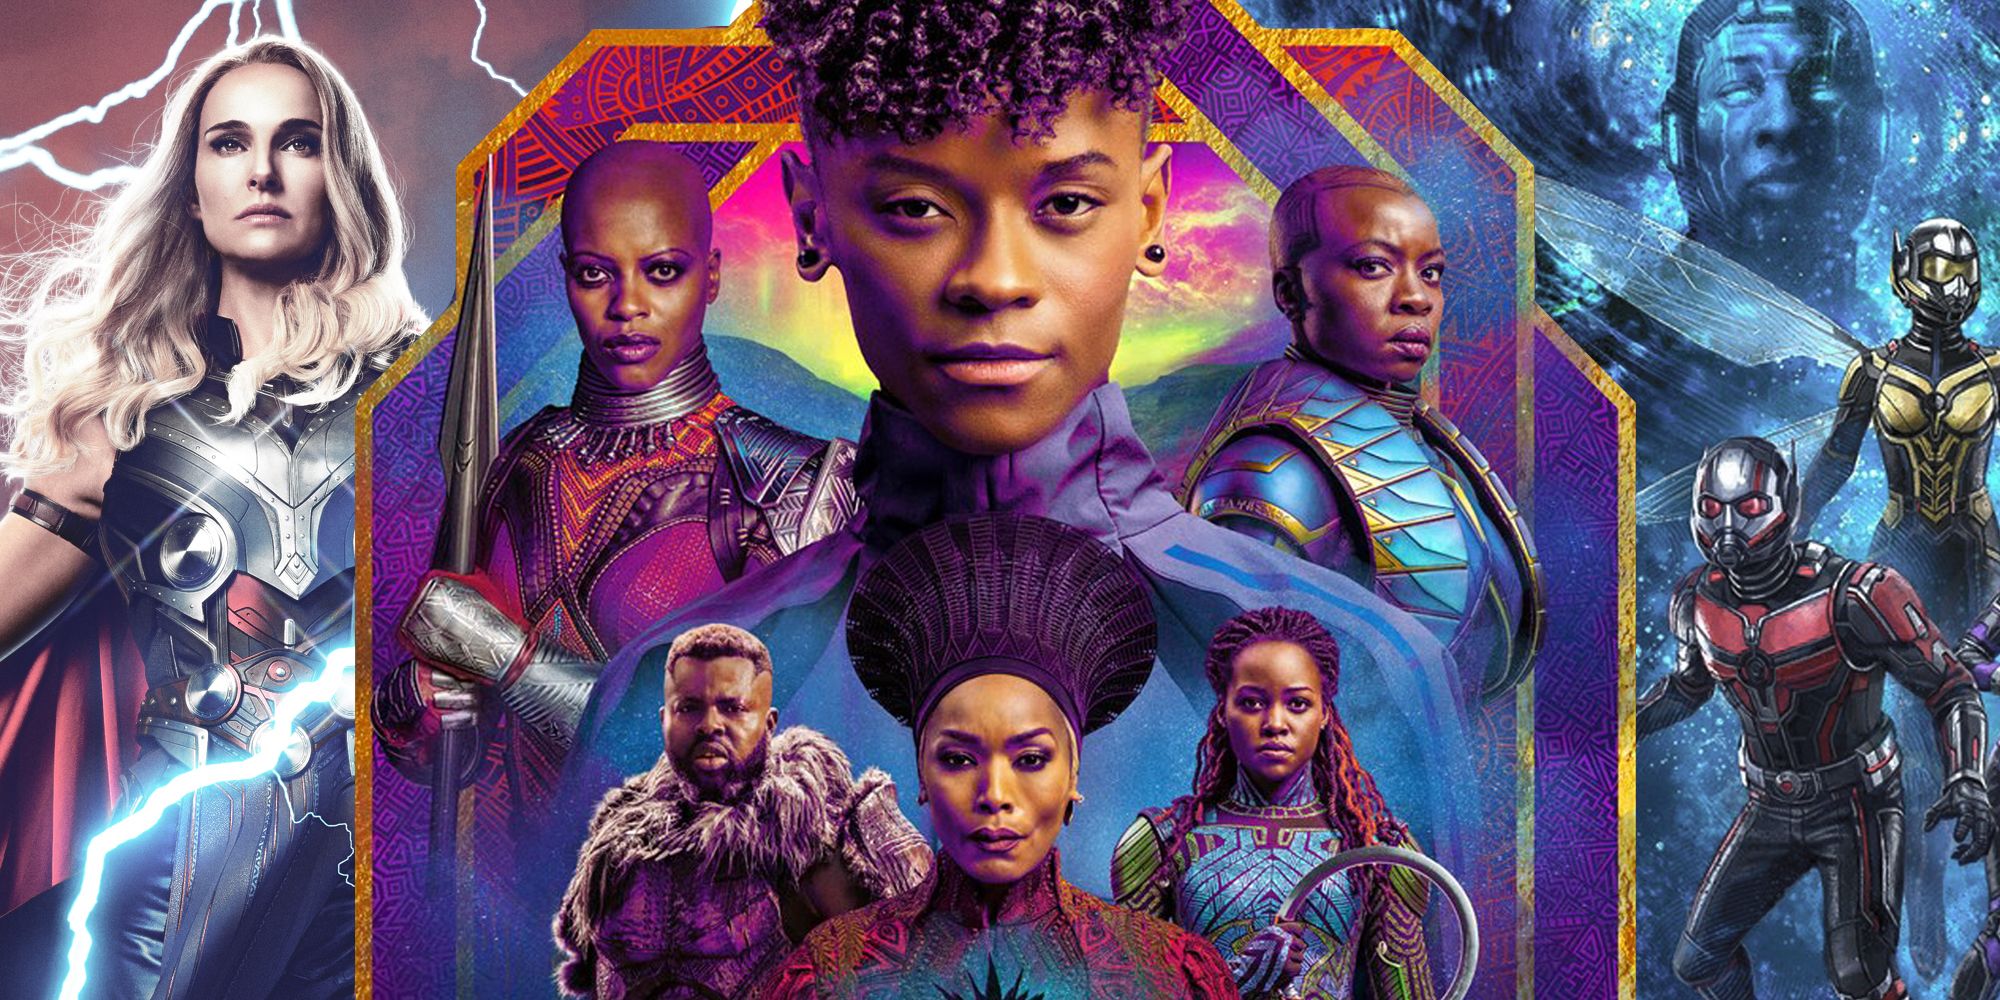 Black Panther: Wakanda Forever poster overlaid on top of the posters for Thor: Love and Thunder and Ant-Man and the Wasp: Quantumania